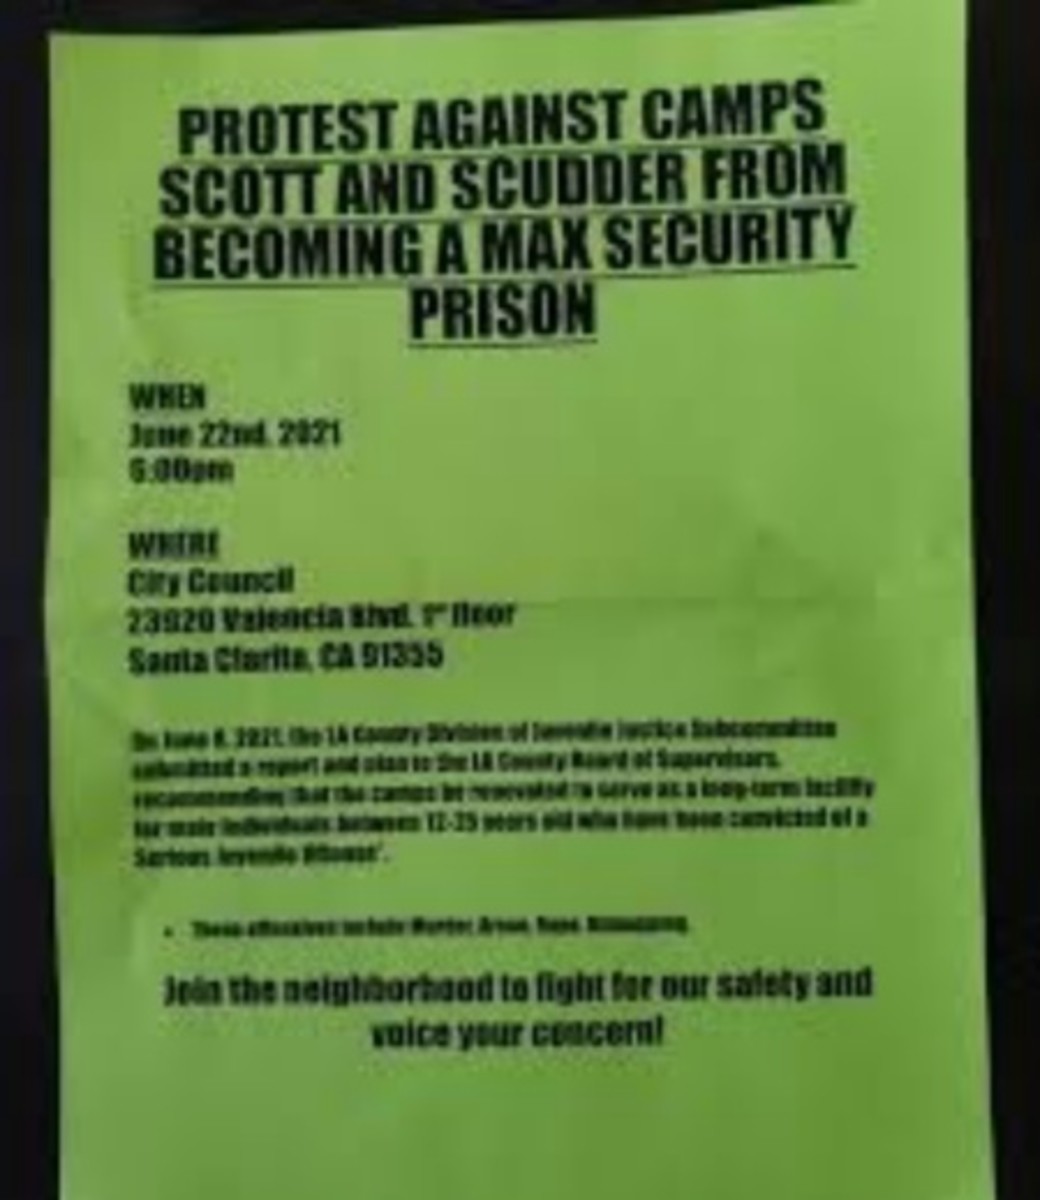 A flyer encouraging Santa Clarita residents to protest the use of nearby camps for youth offenders’ housing and rehabilitation.